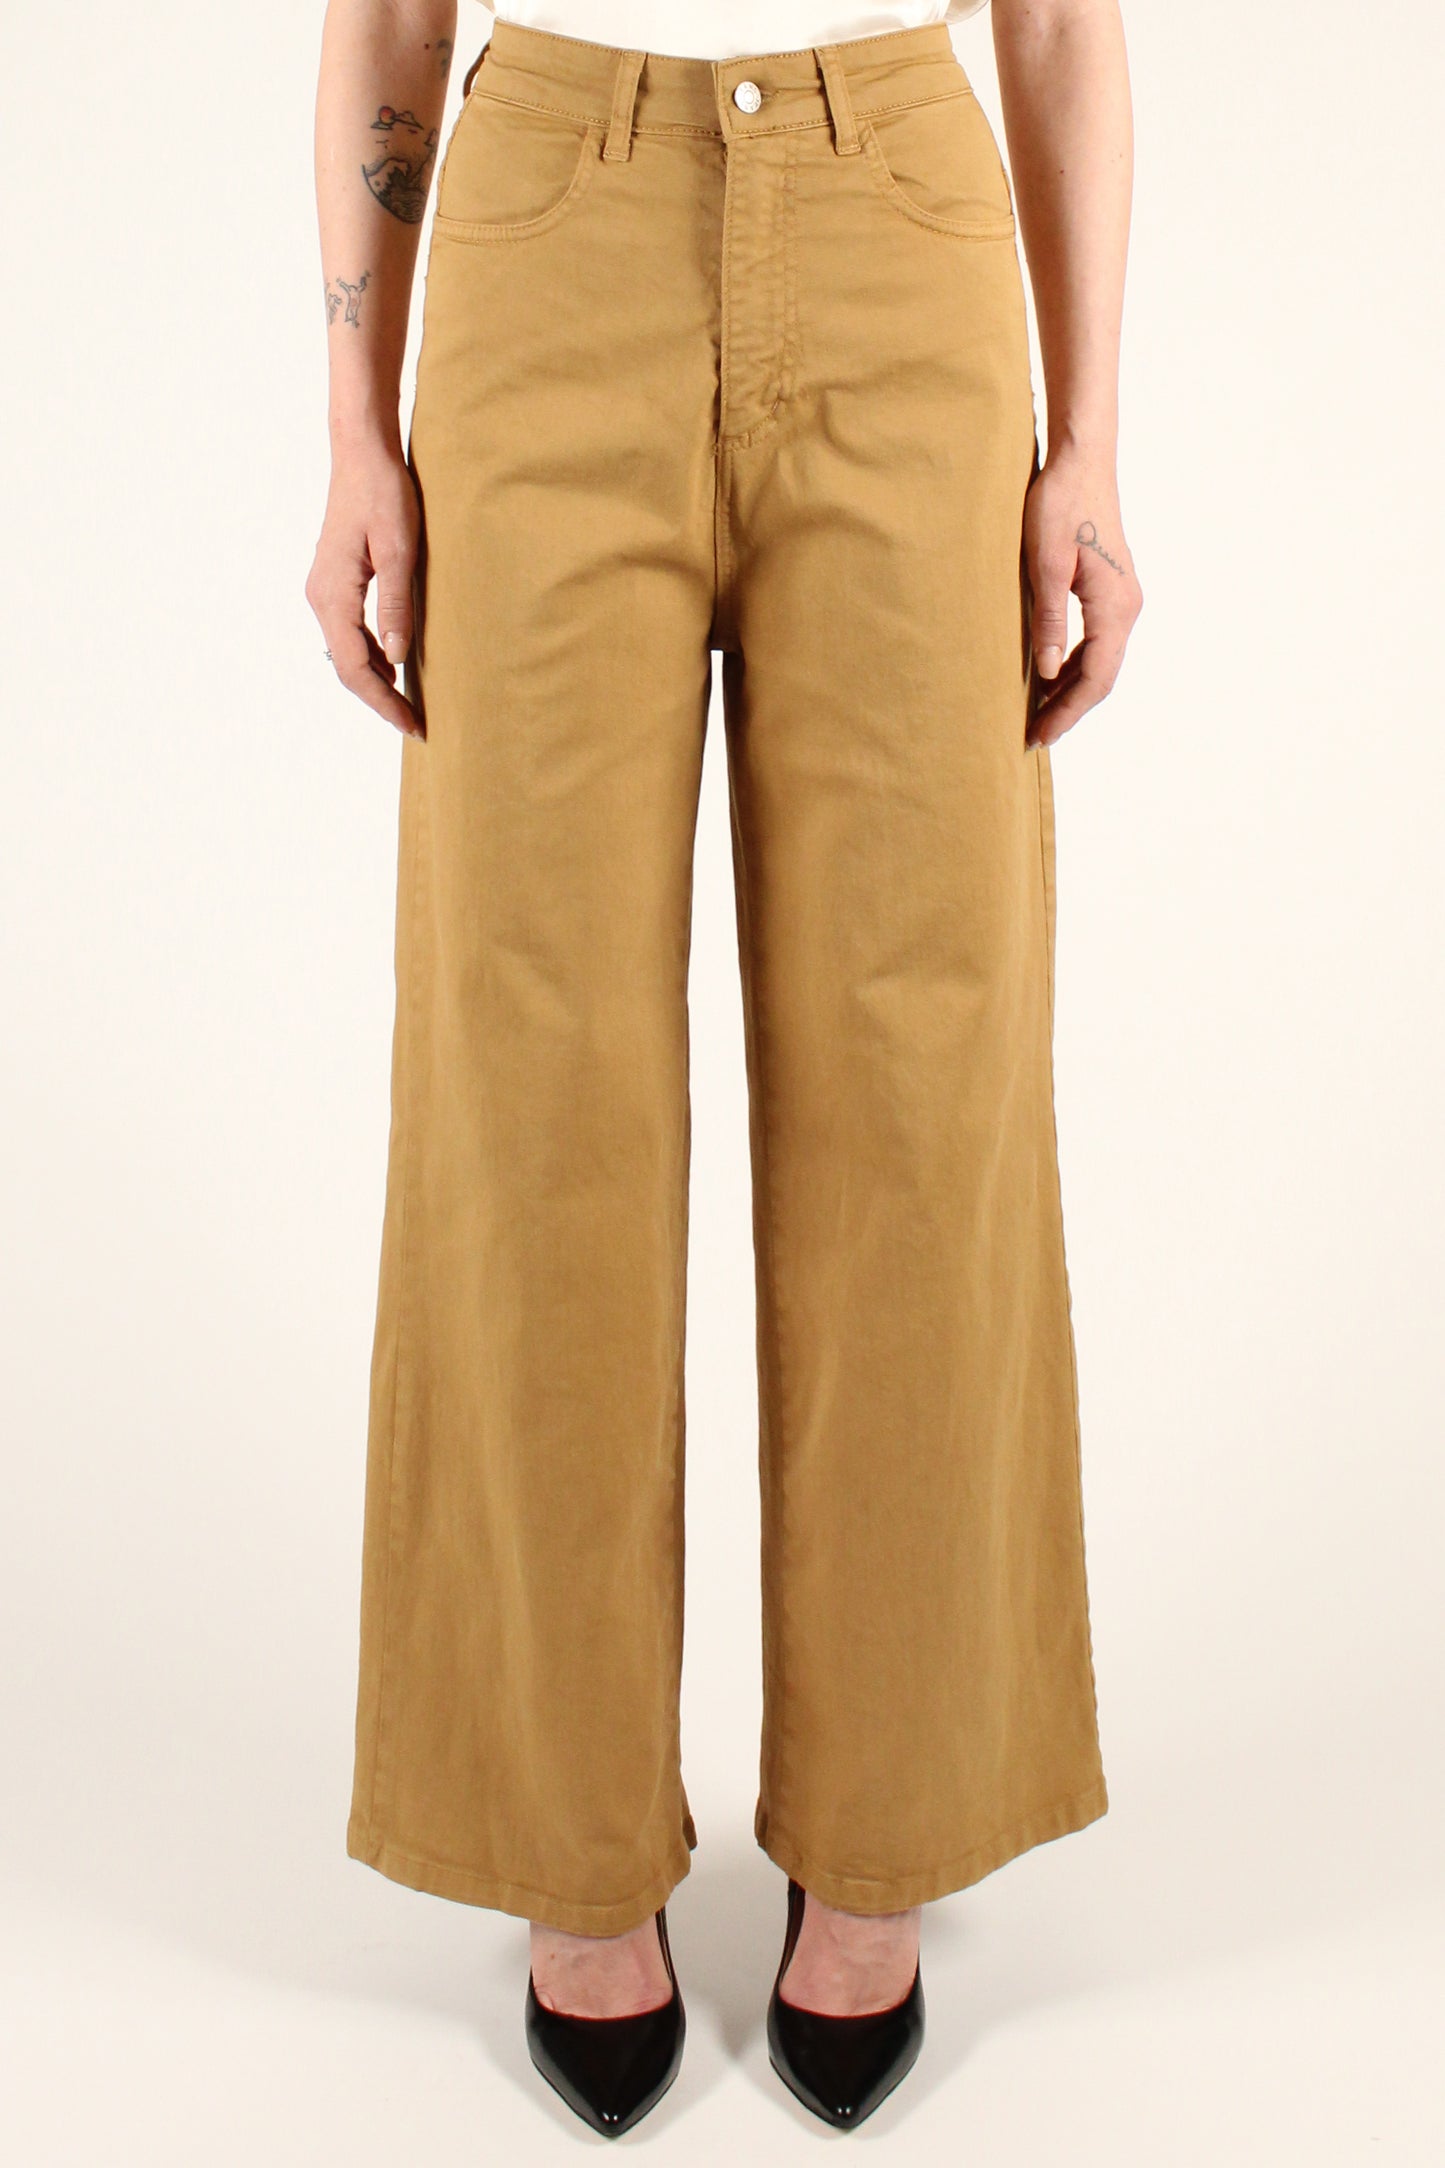 Solid Color Straight Leg Jeans